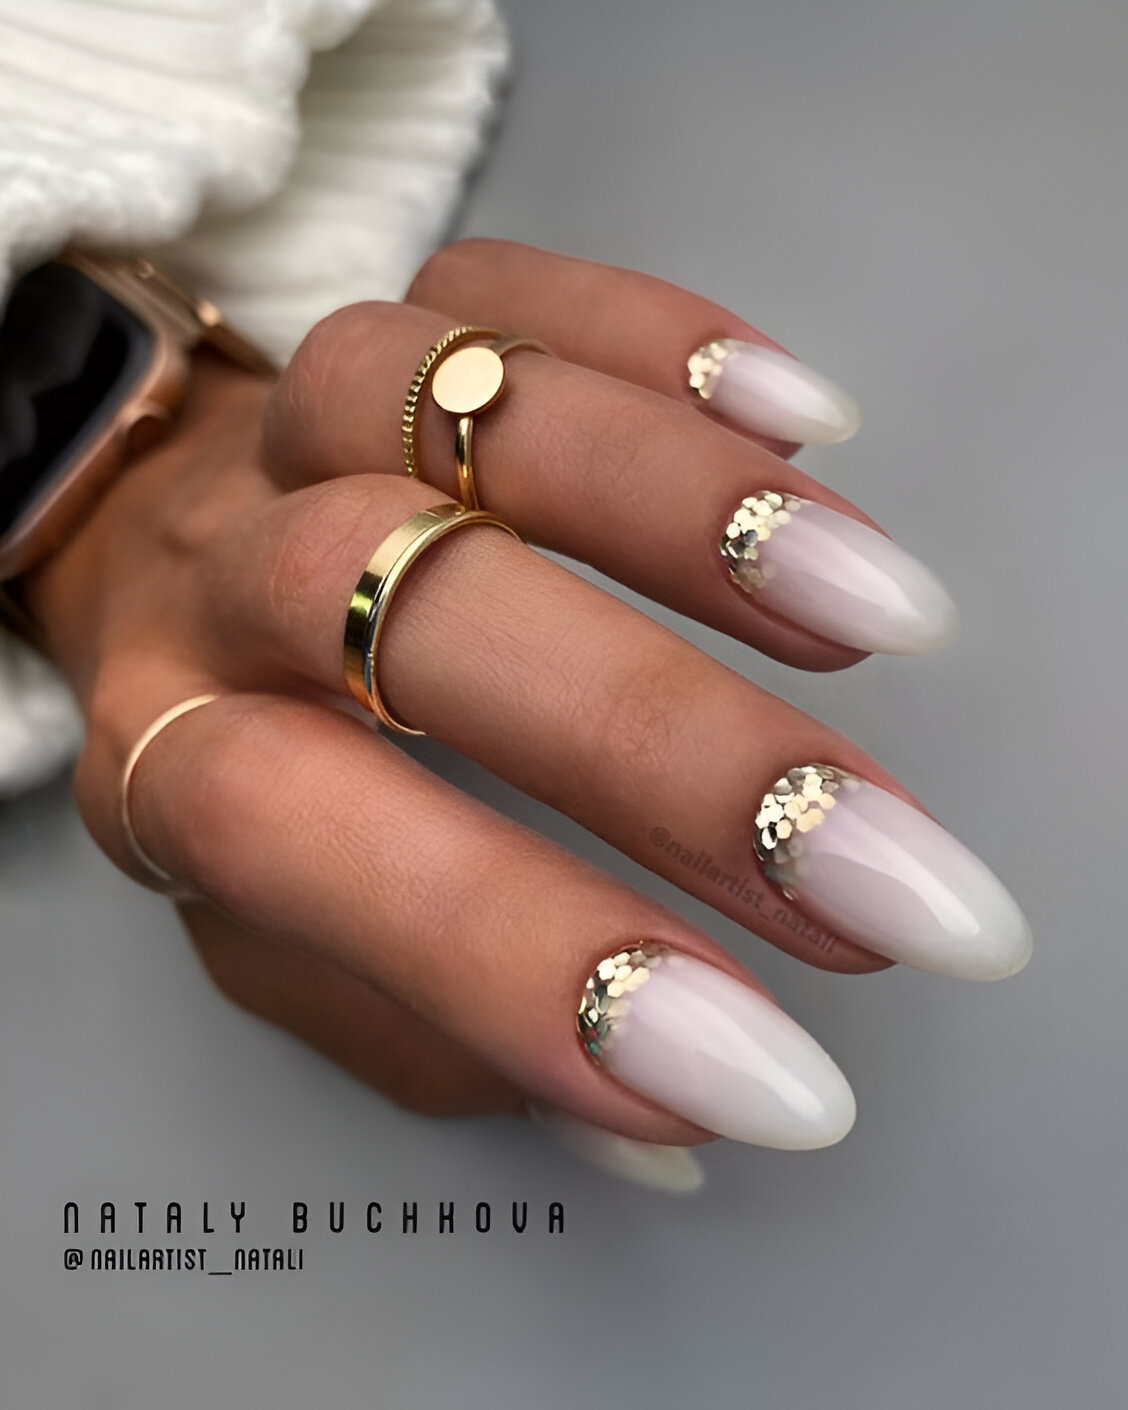 White Almond Manicures 10